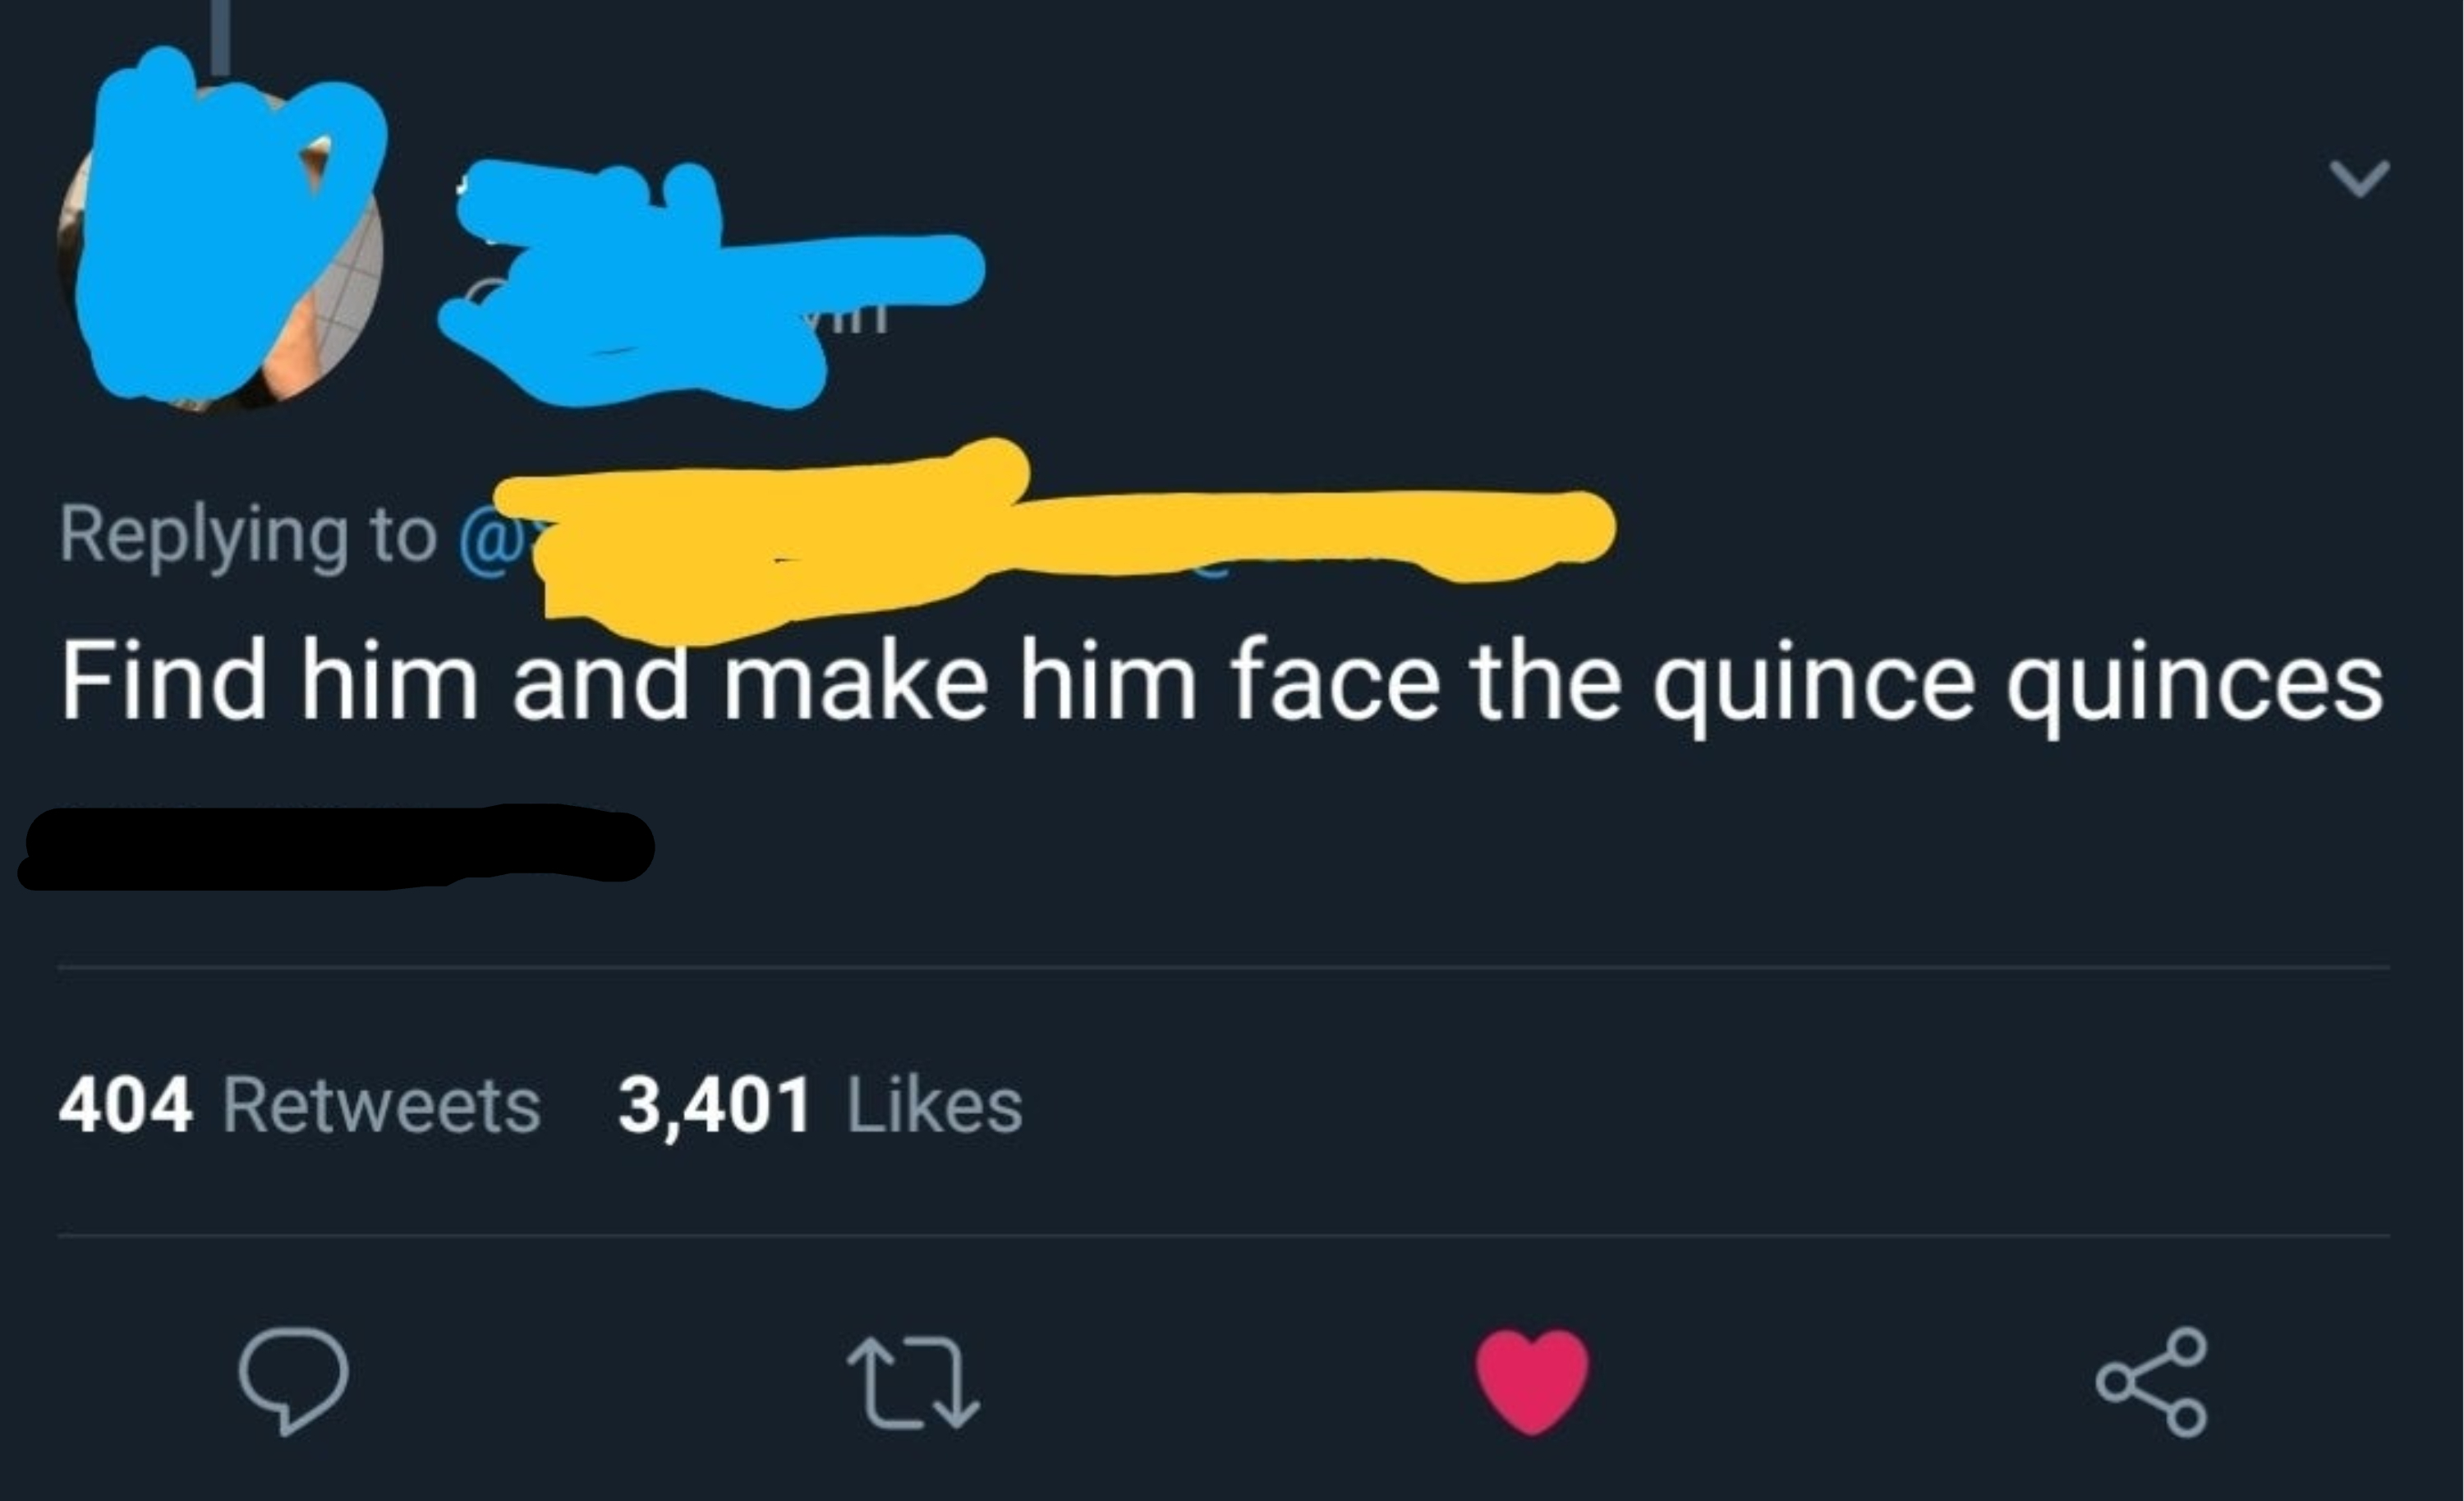 Summarized tweet: A user says to find someone &quot;and make him face the quince quinces&quot; instead of &quot;the consequences&quot;